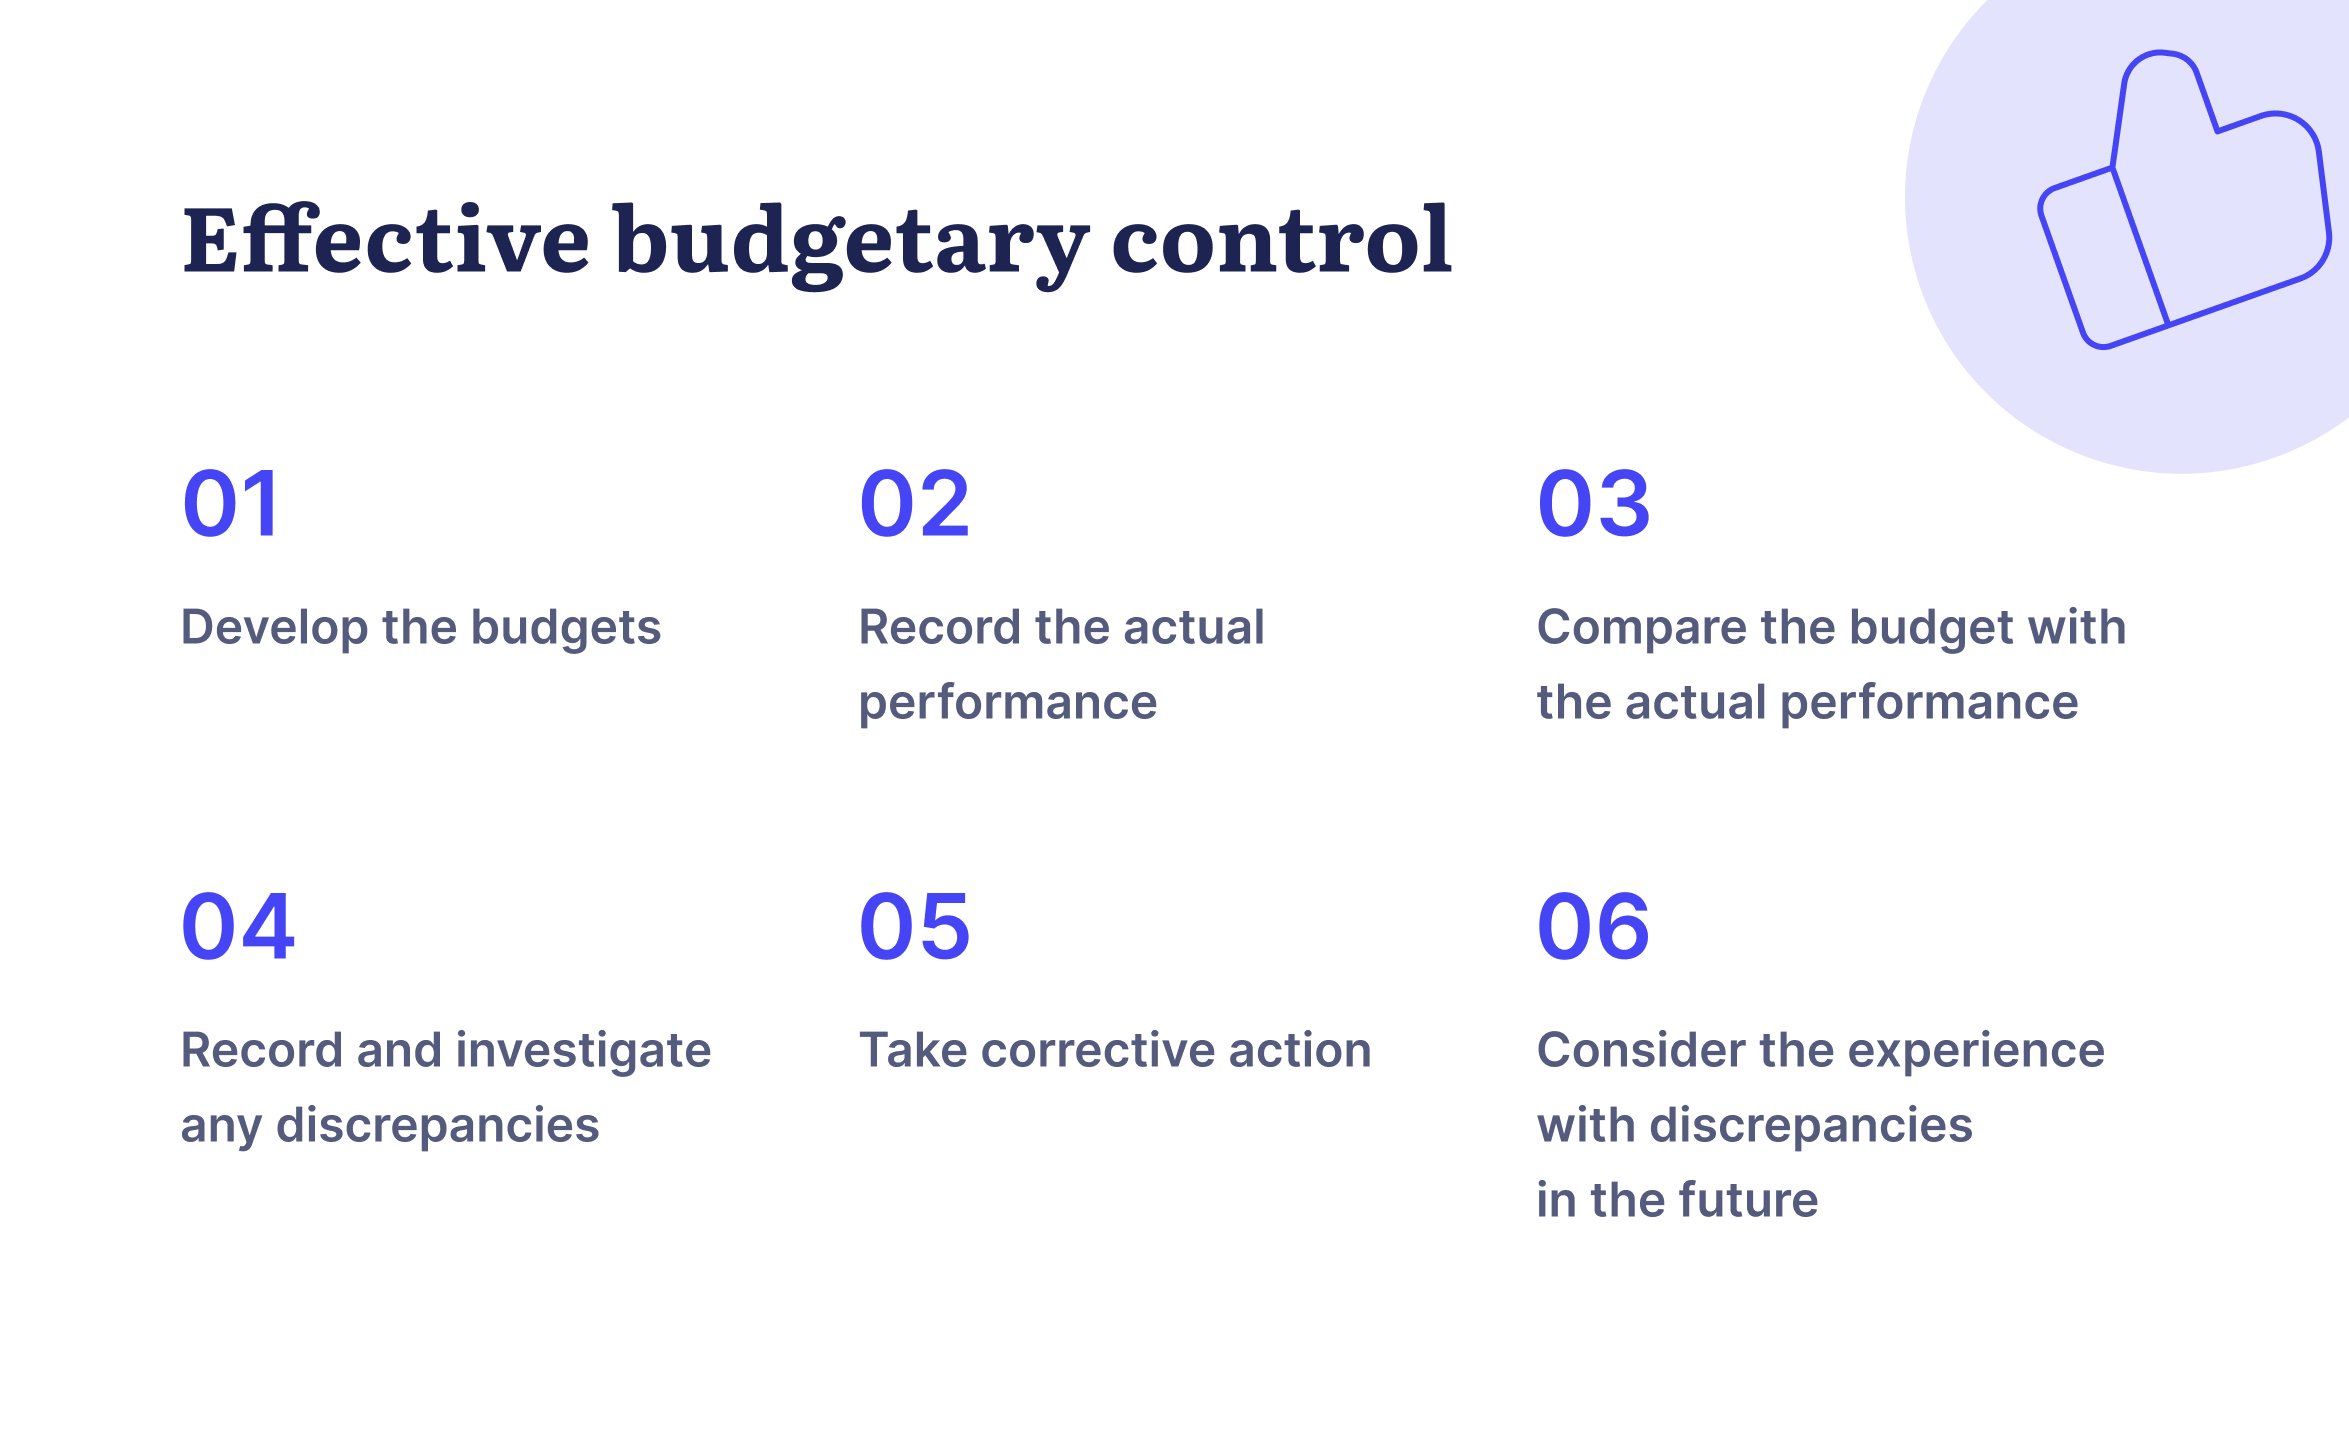 steps of effective budgetary control